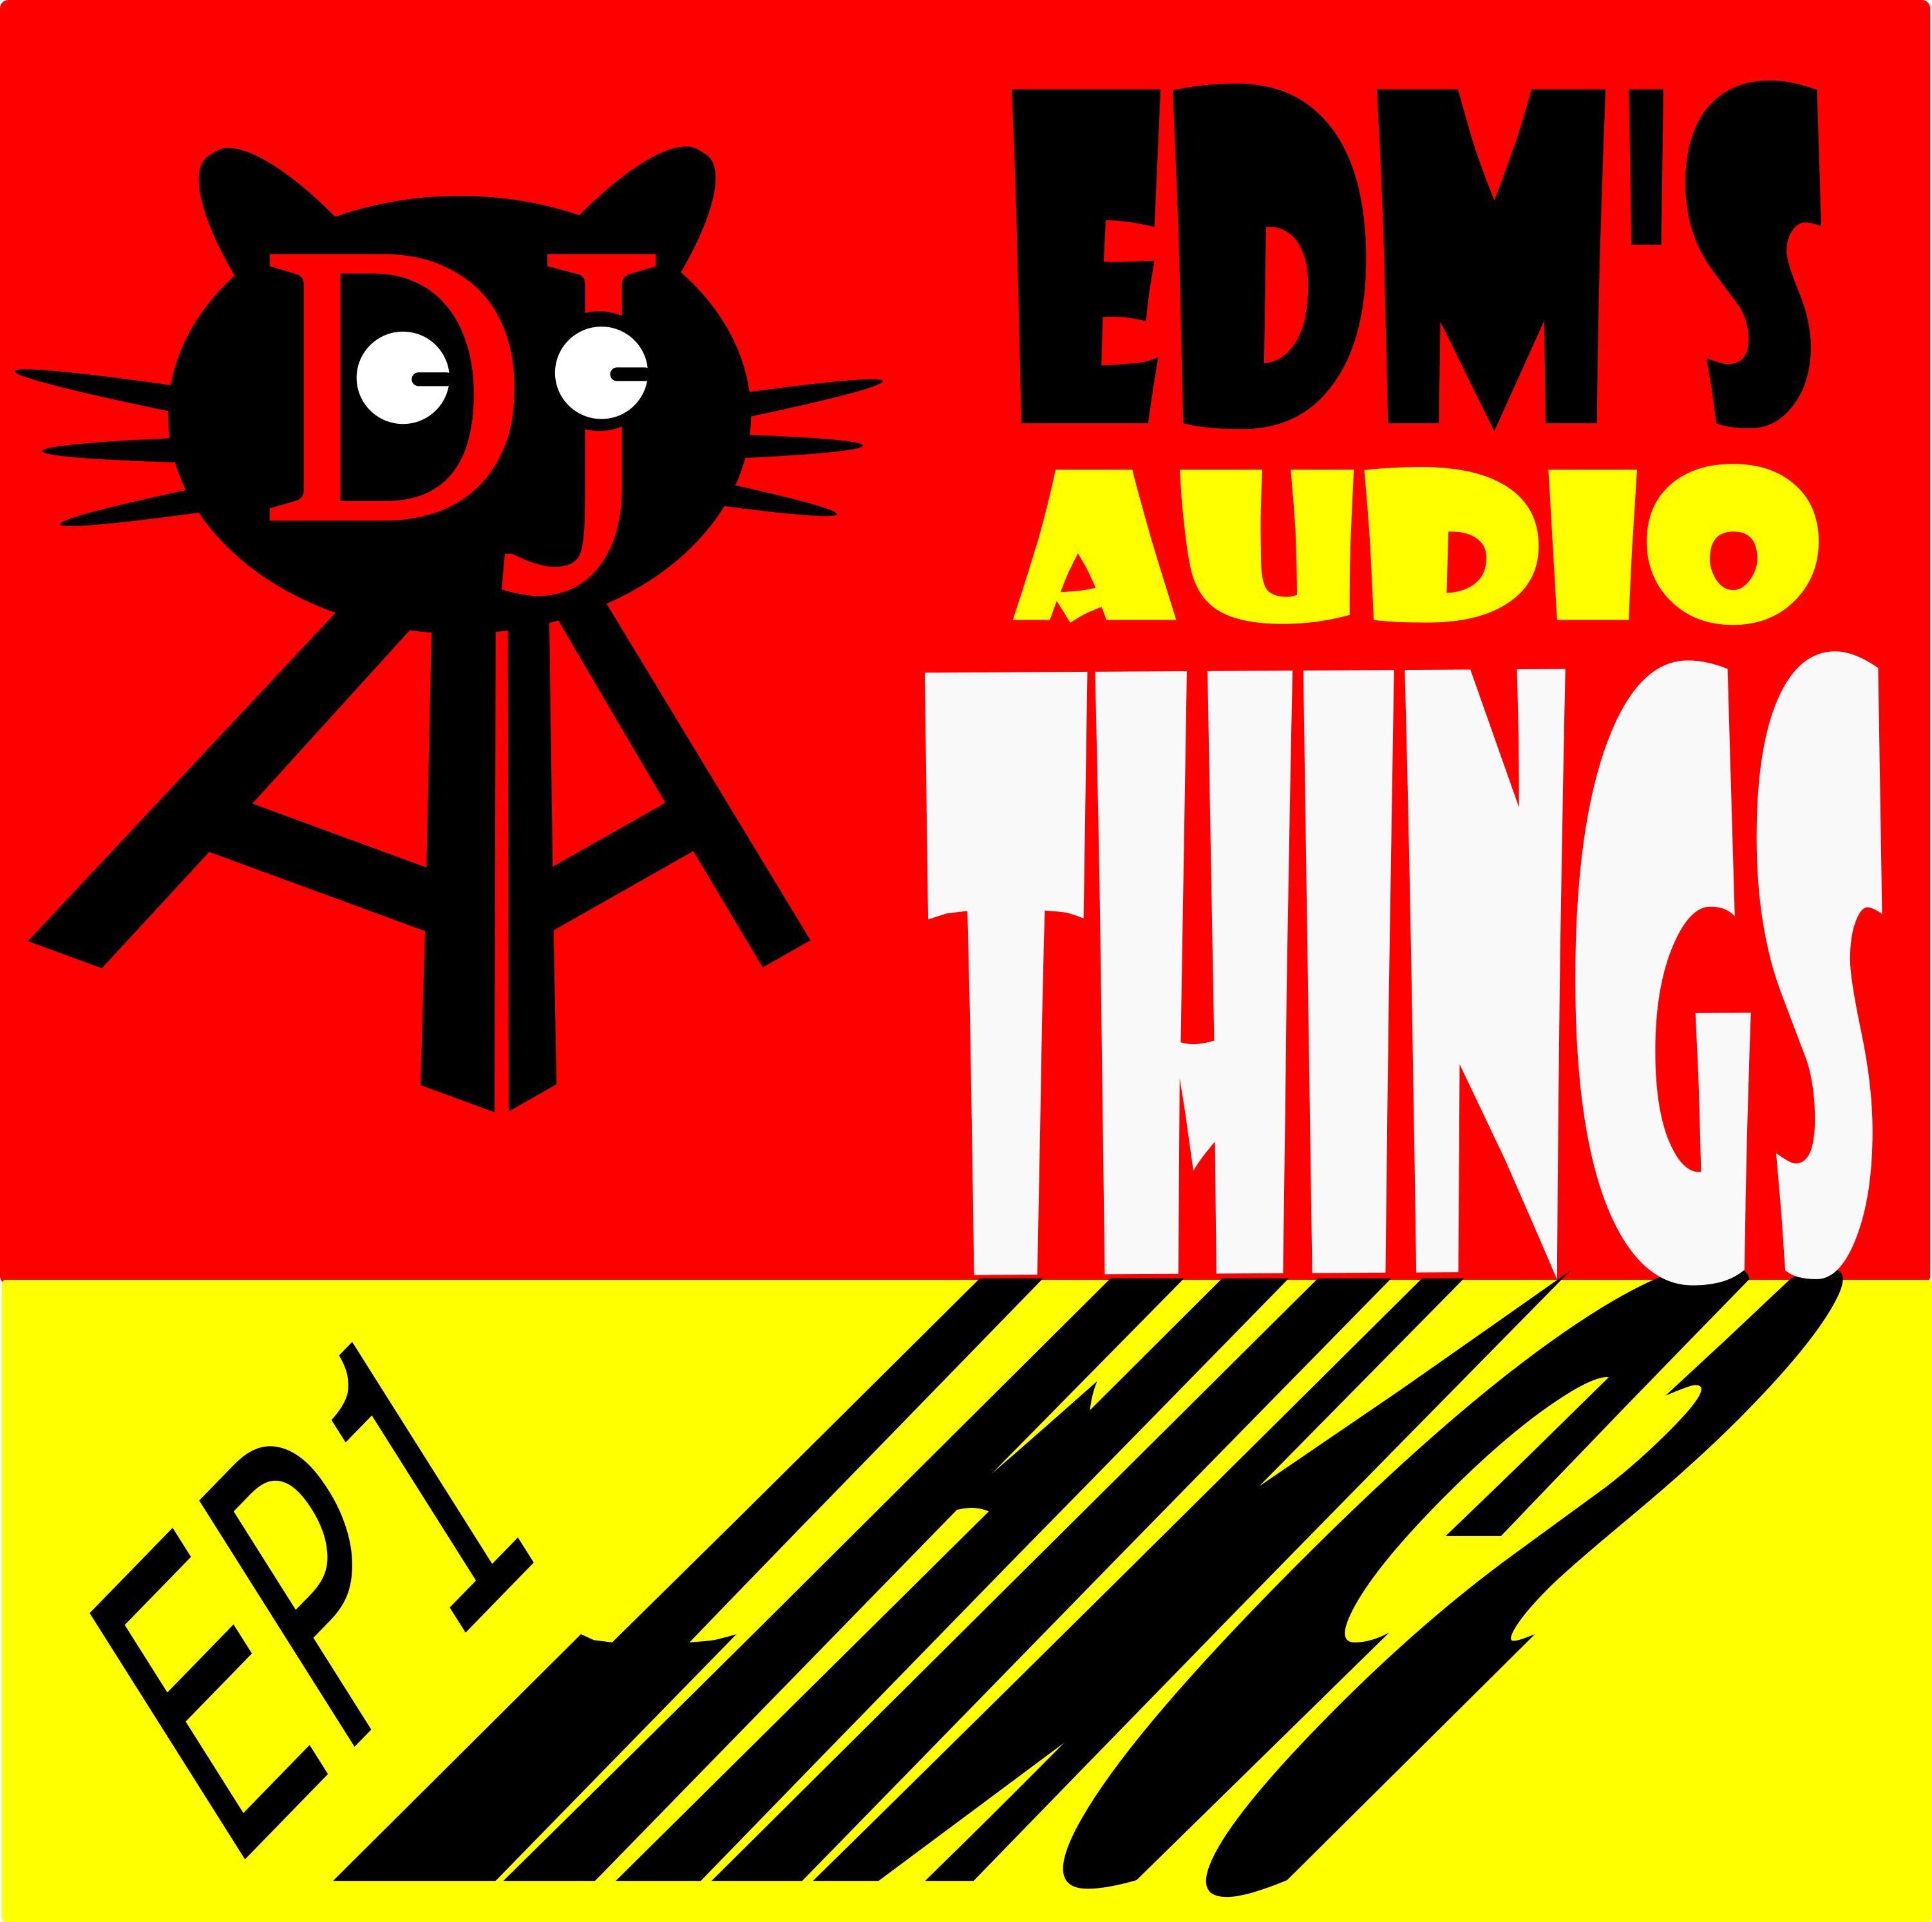 LogoEDMS_audio_thing